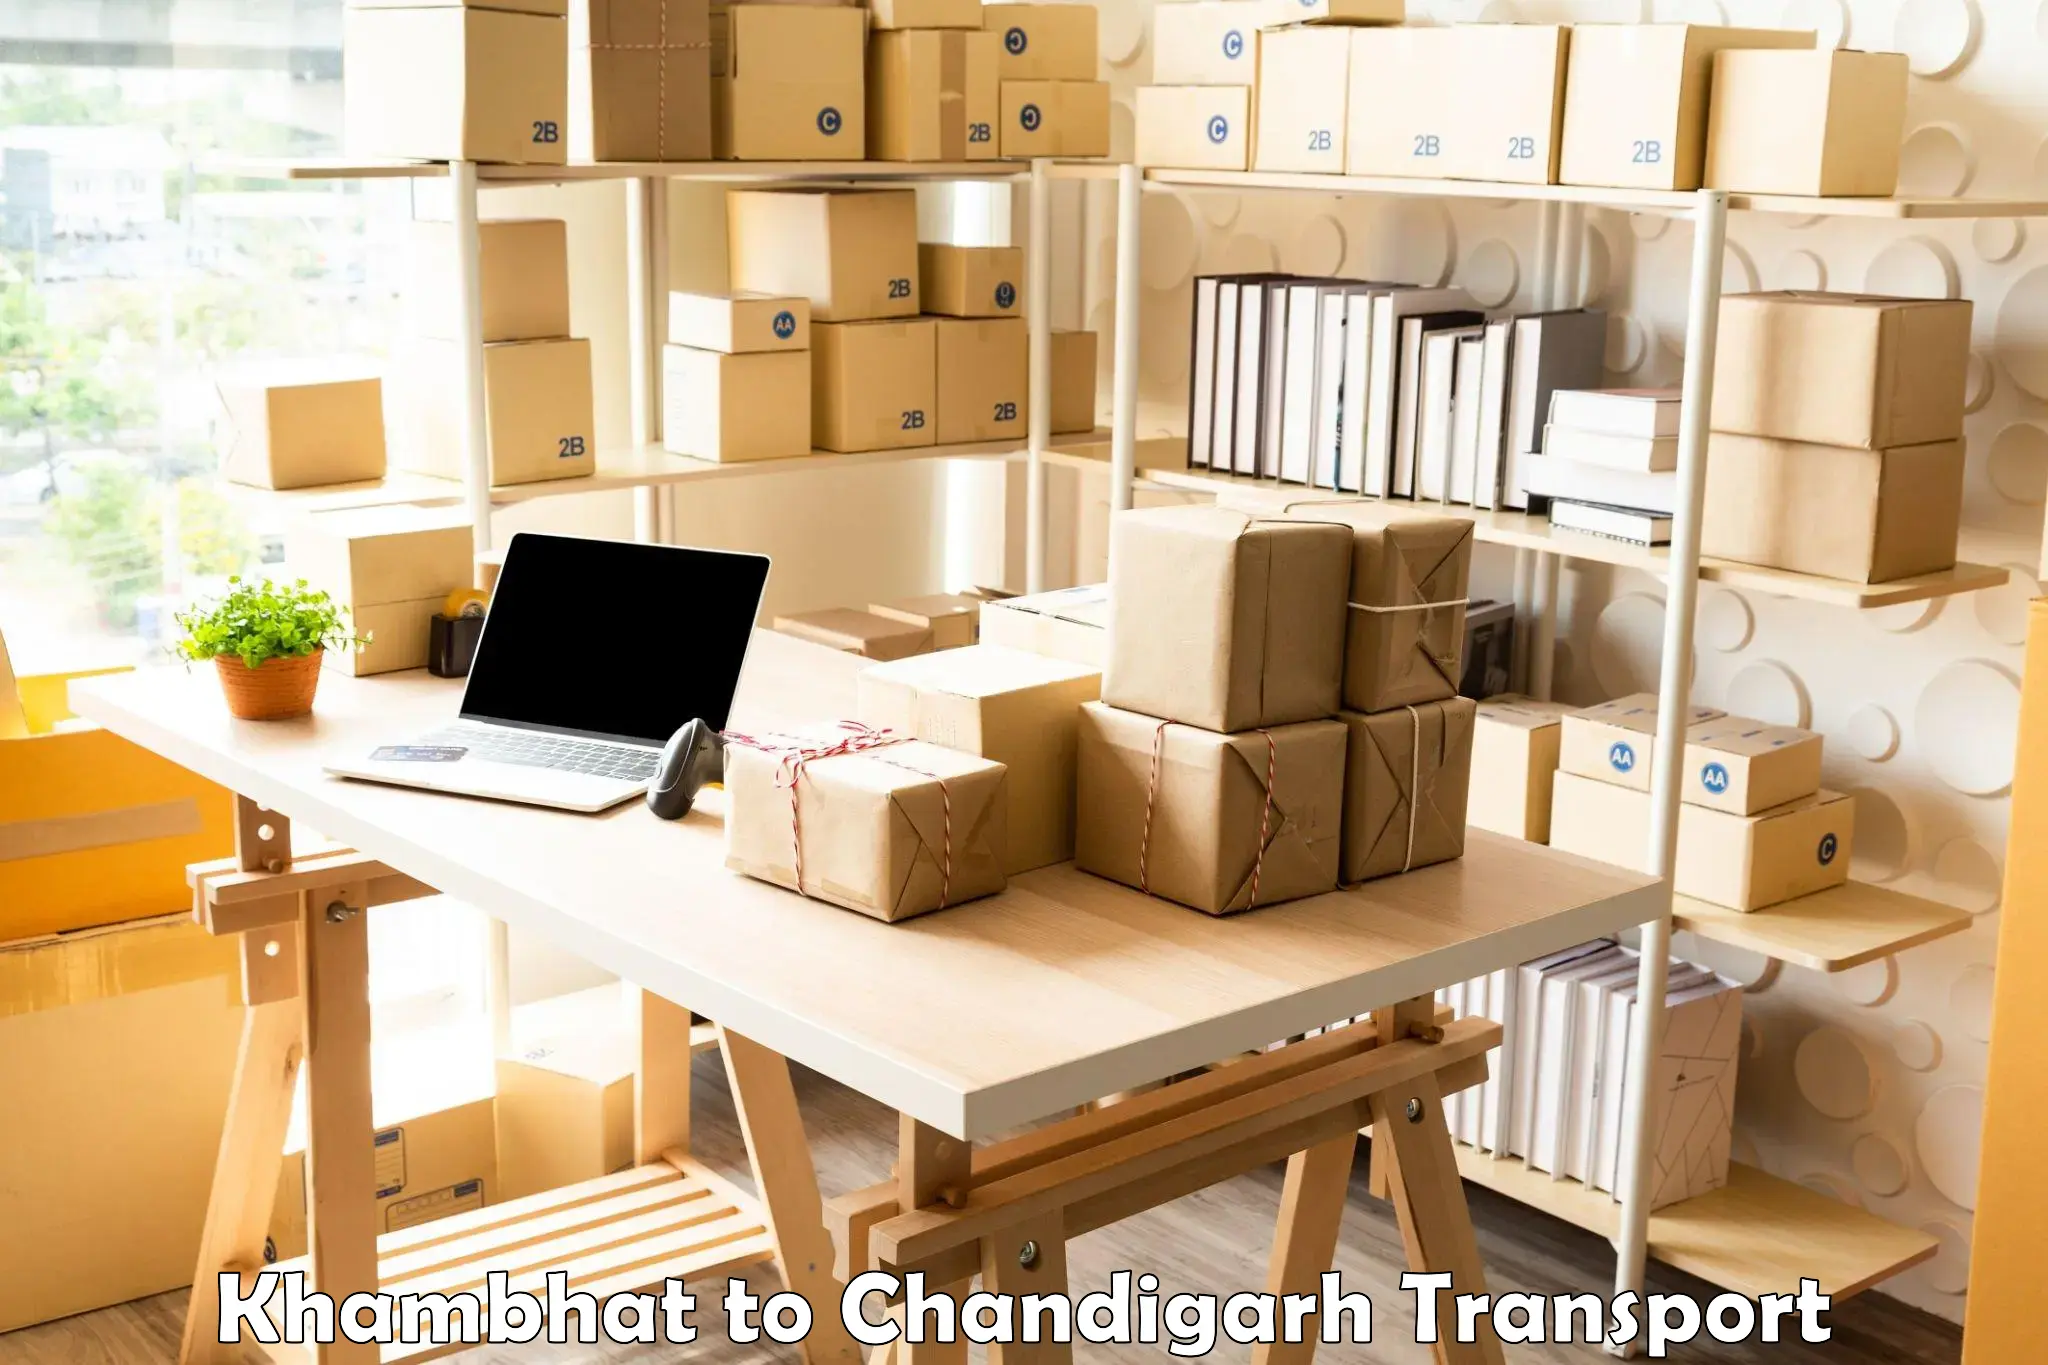 Vehicle transport services in Khambhat to Chandigarh